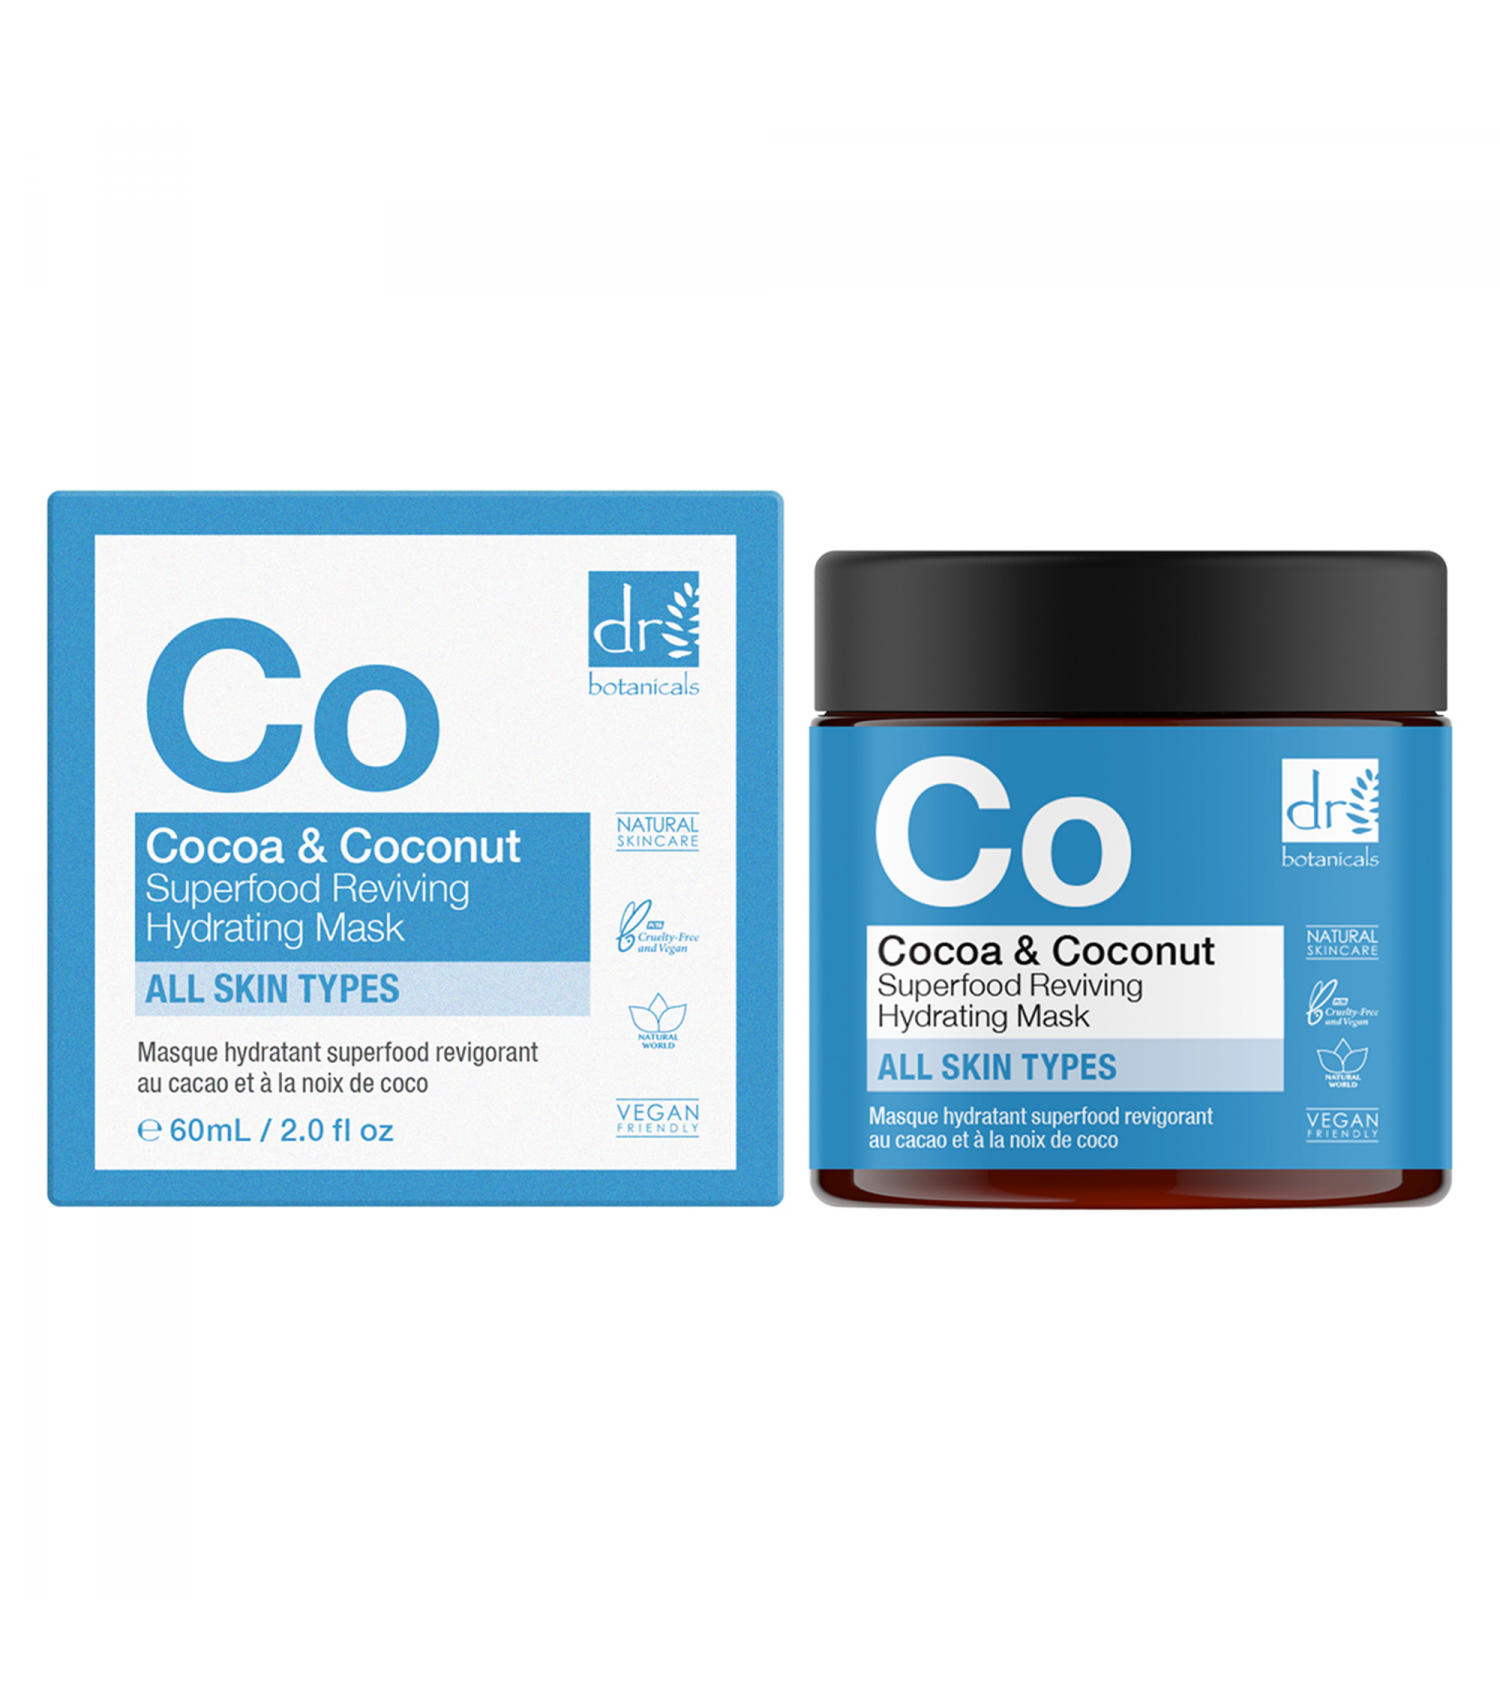 Dr.Botanicals Cocoa & Coconut Superfood Reviving Hydrating Mask 60ml